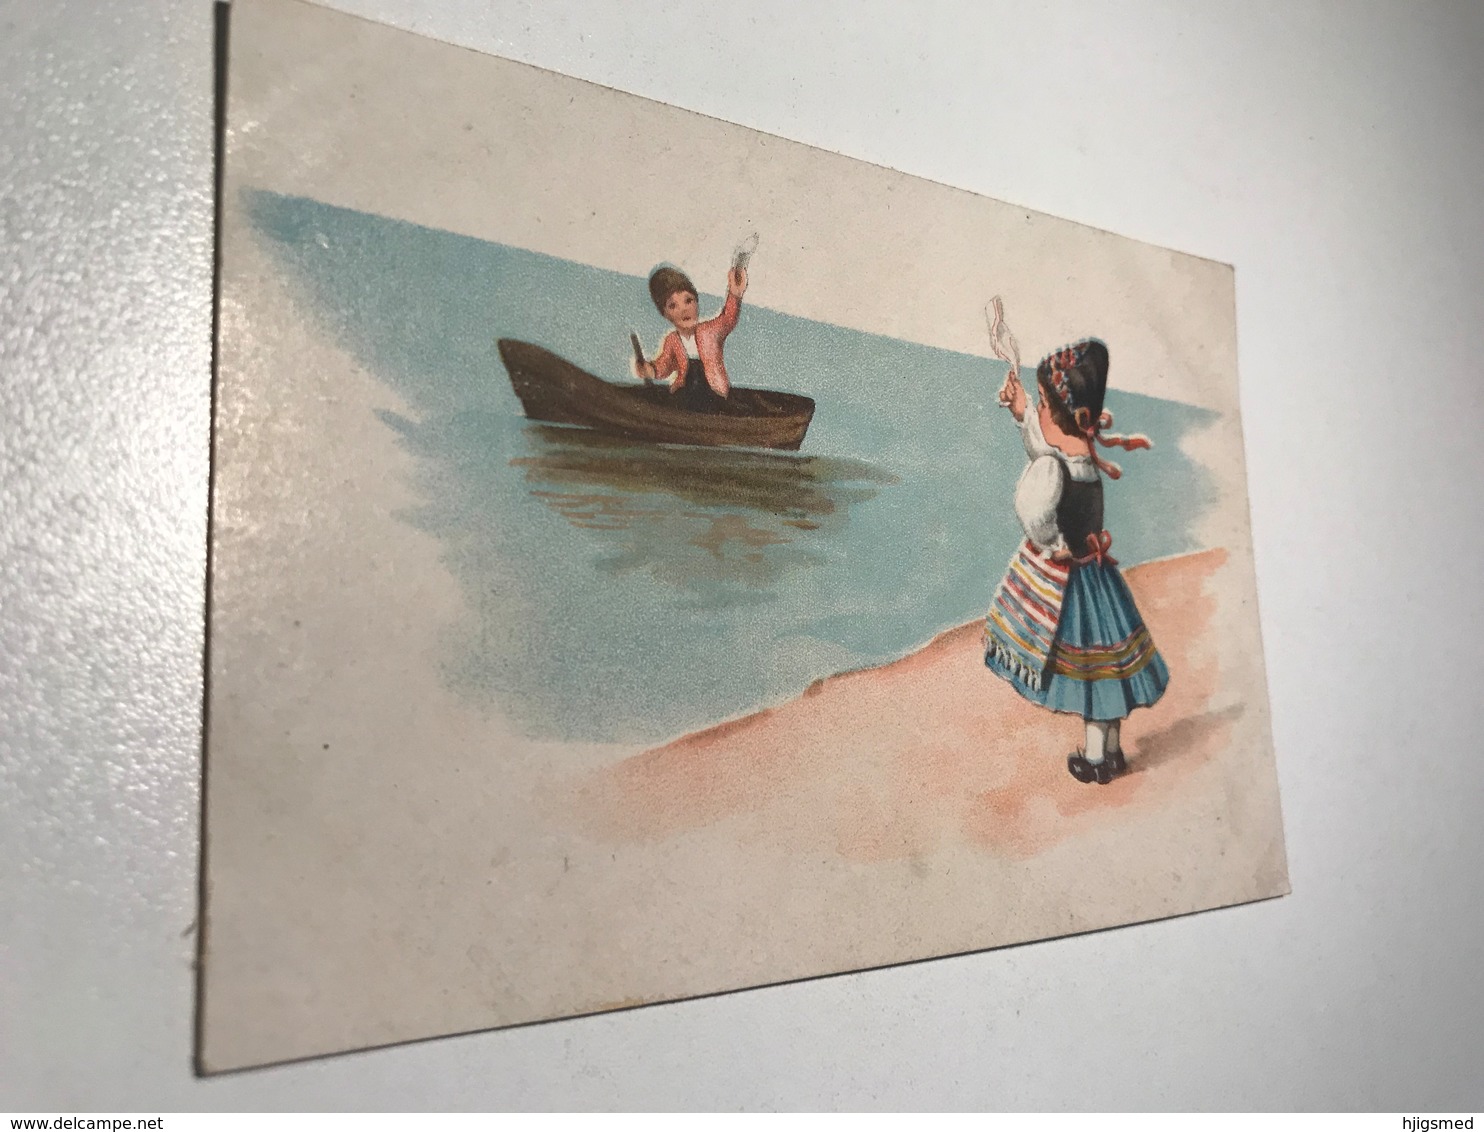 Elly Frank Artist Unsigned Graphic Art Young Couple Boy Girl In Costume Boat WSSB 9129 Post Card Postkarte POSTCARD - Frank, Elly